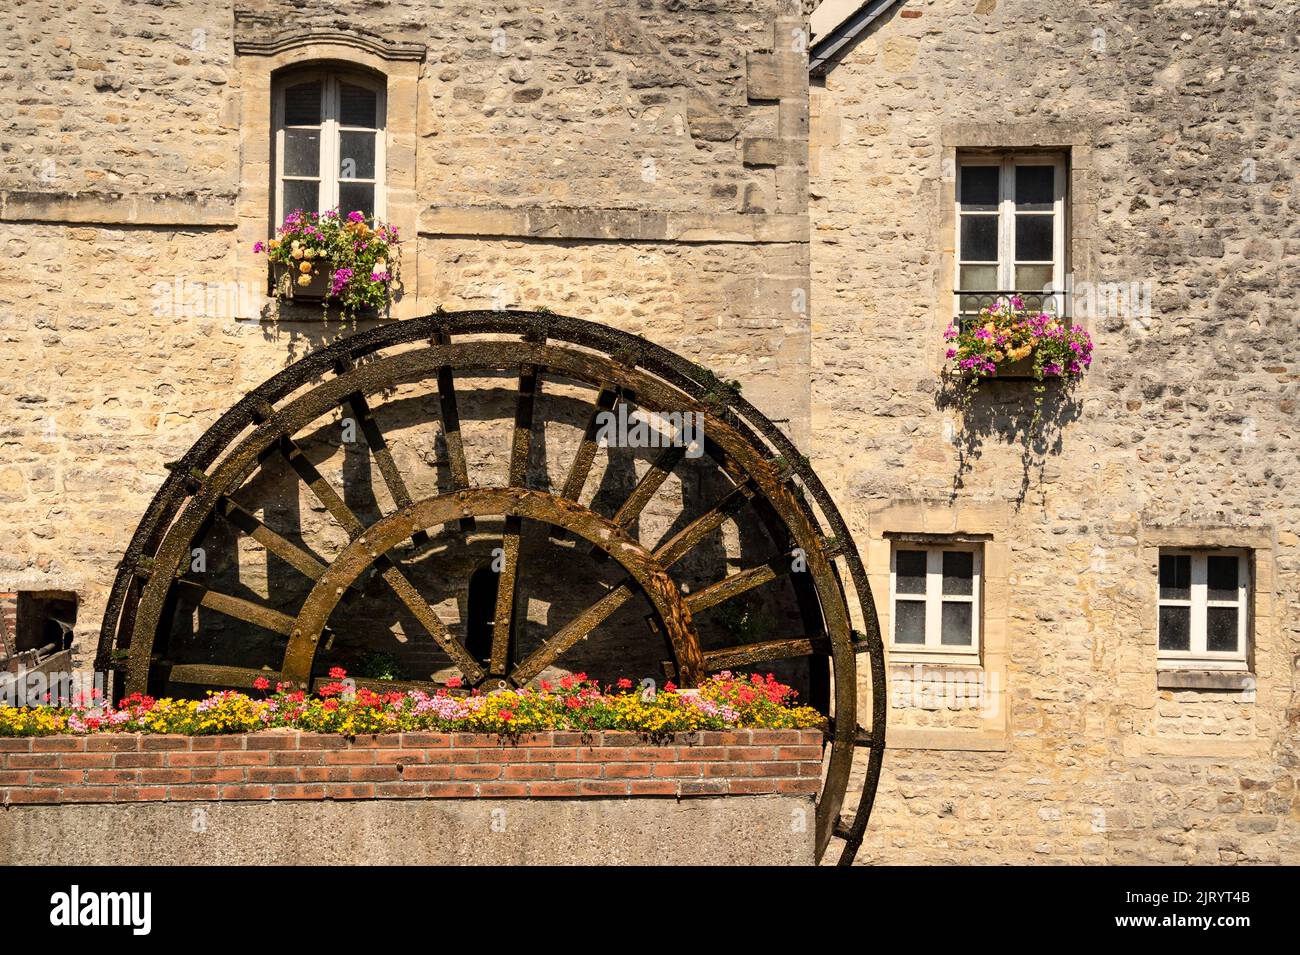 A water wheel at the Aure river of Bayeux, Frace Stock Photo